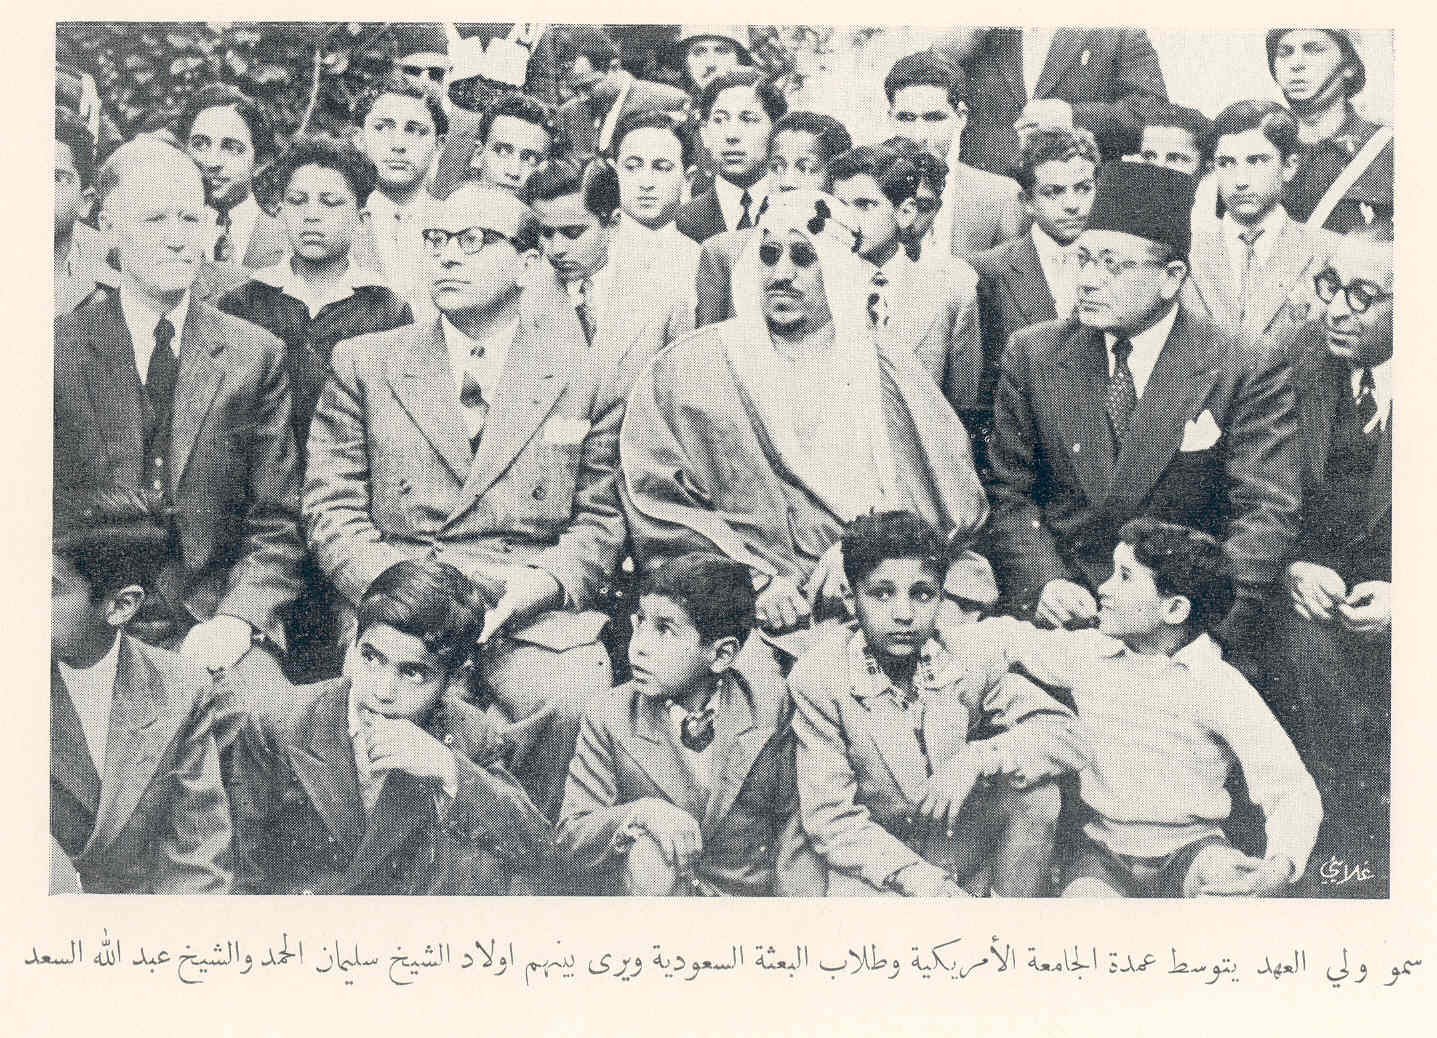 Crown prince Saud and Mayor of American University with the students, 1953 Beirut